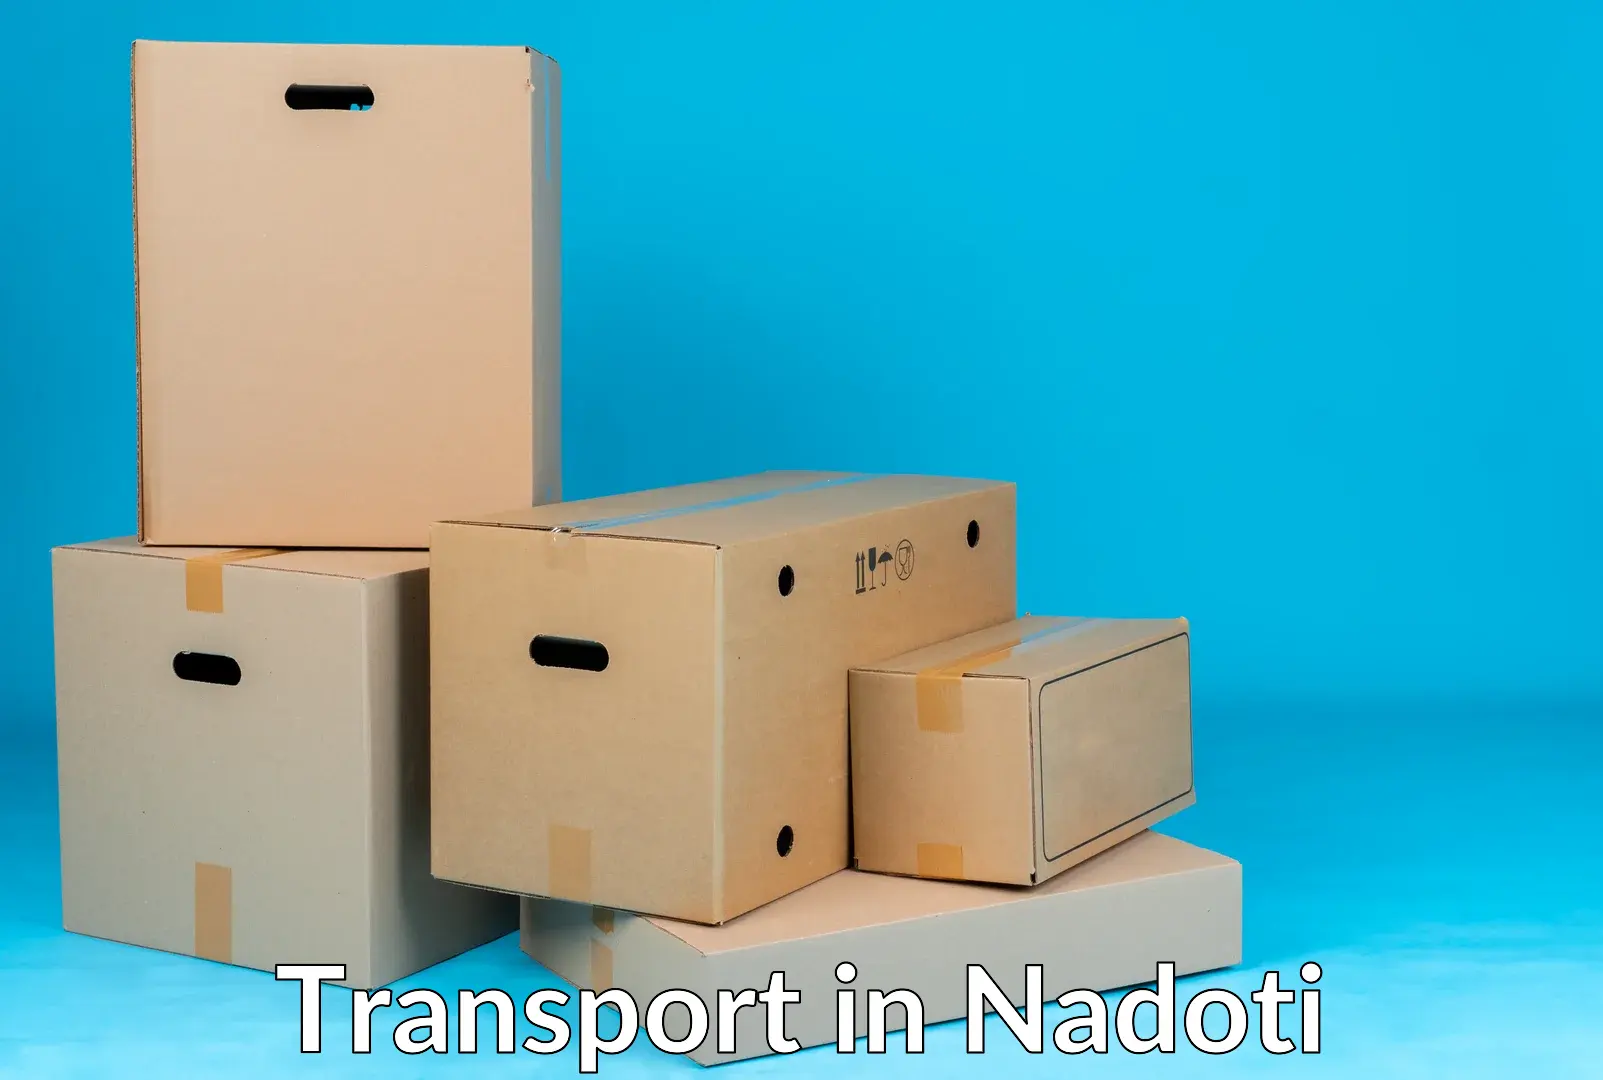 Land transport services in Nadoti